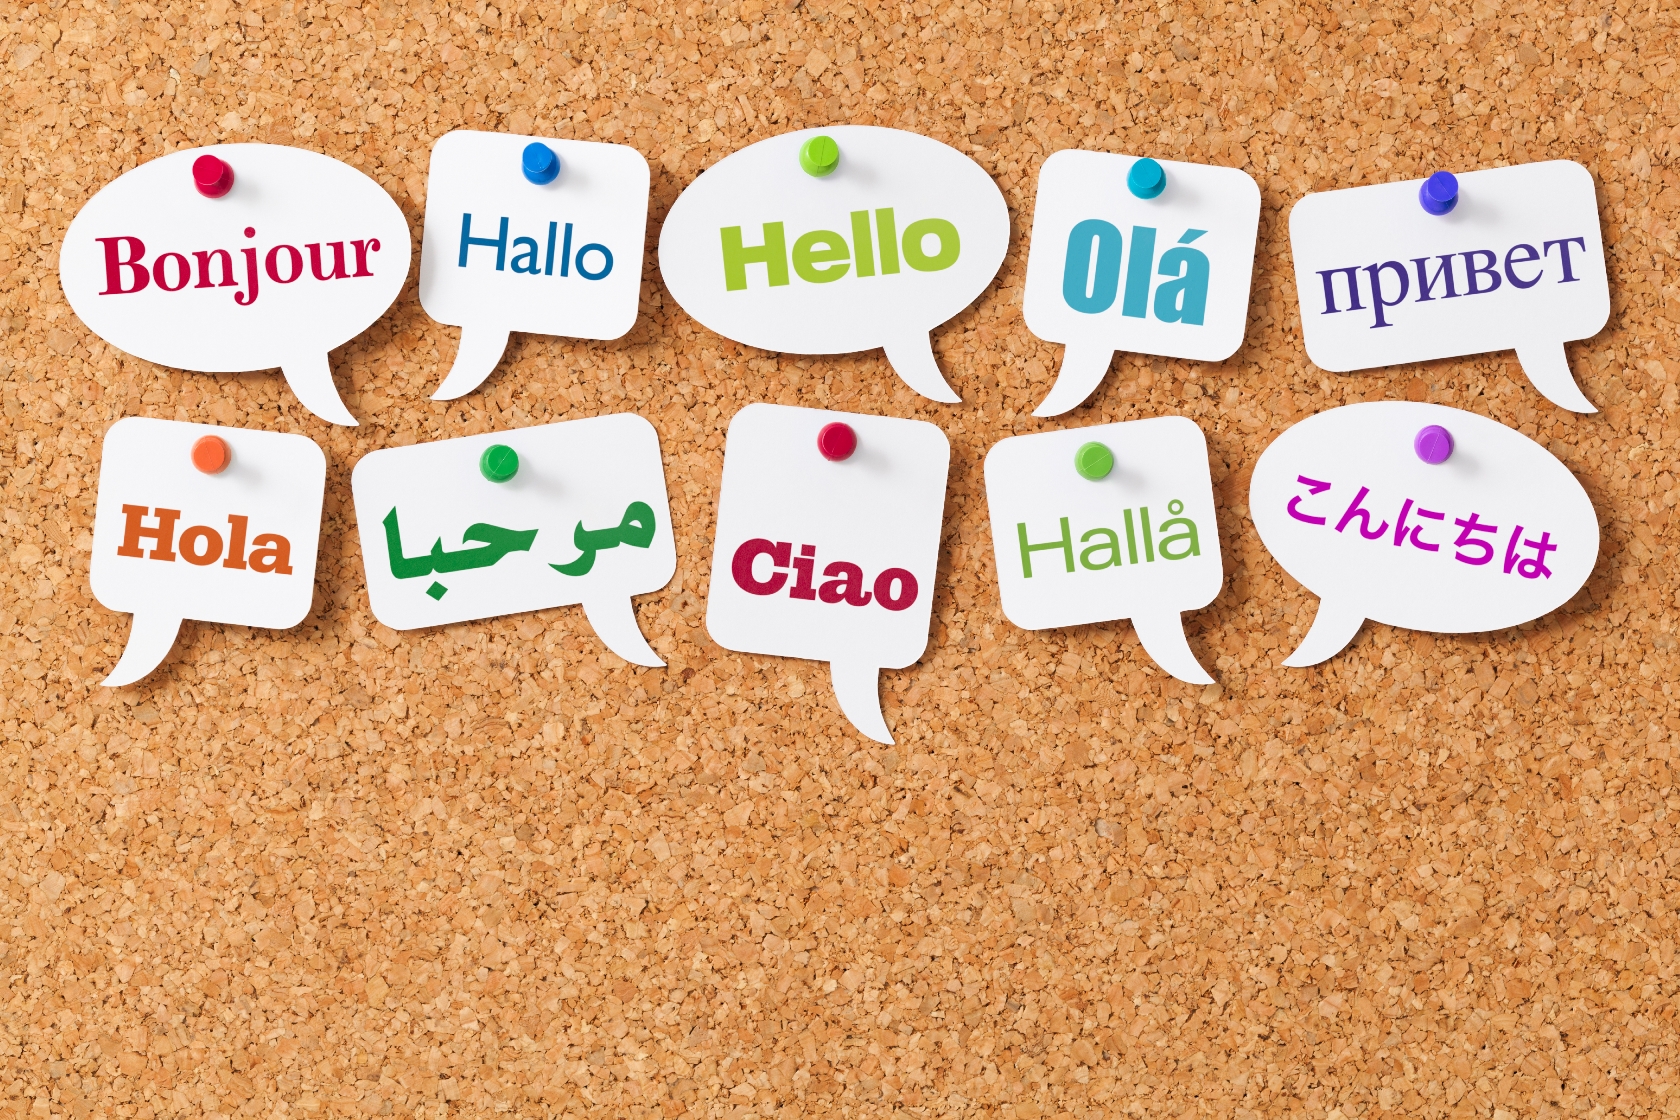 How learning a language can boost your career prospects